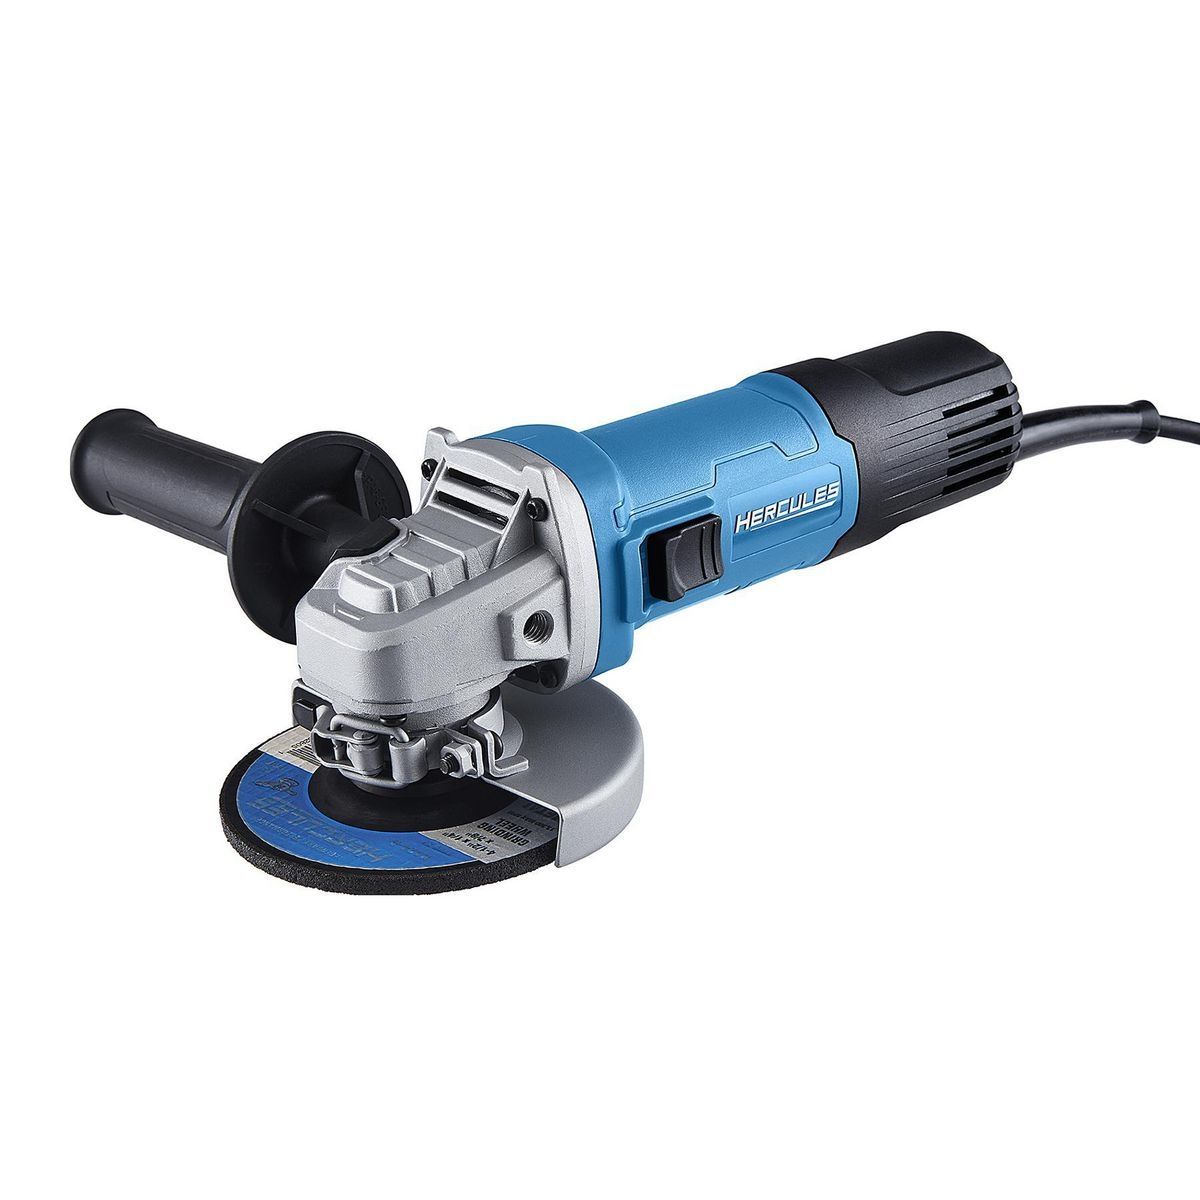 HERCULES 7 Amp 4-1/2 in. Slide Switch Angle Grinder